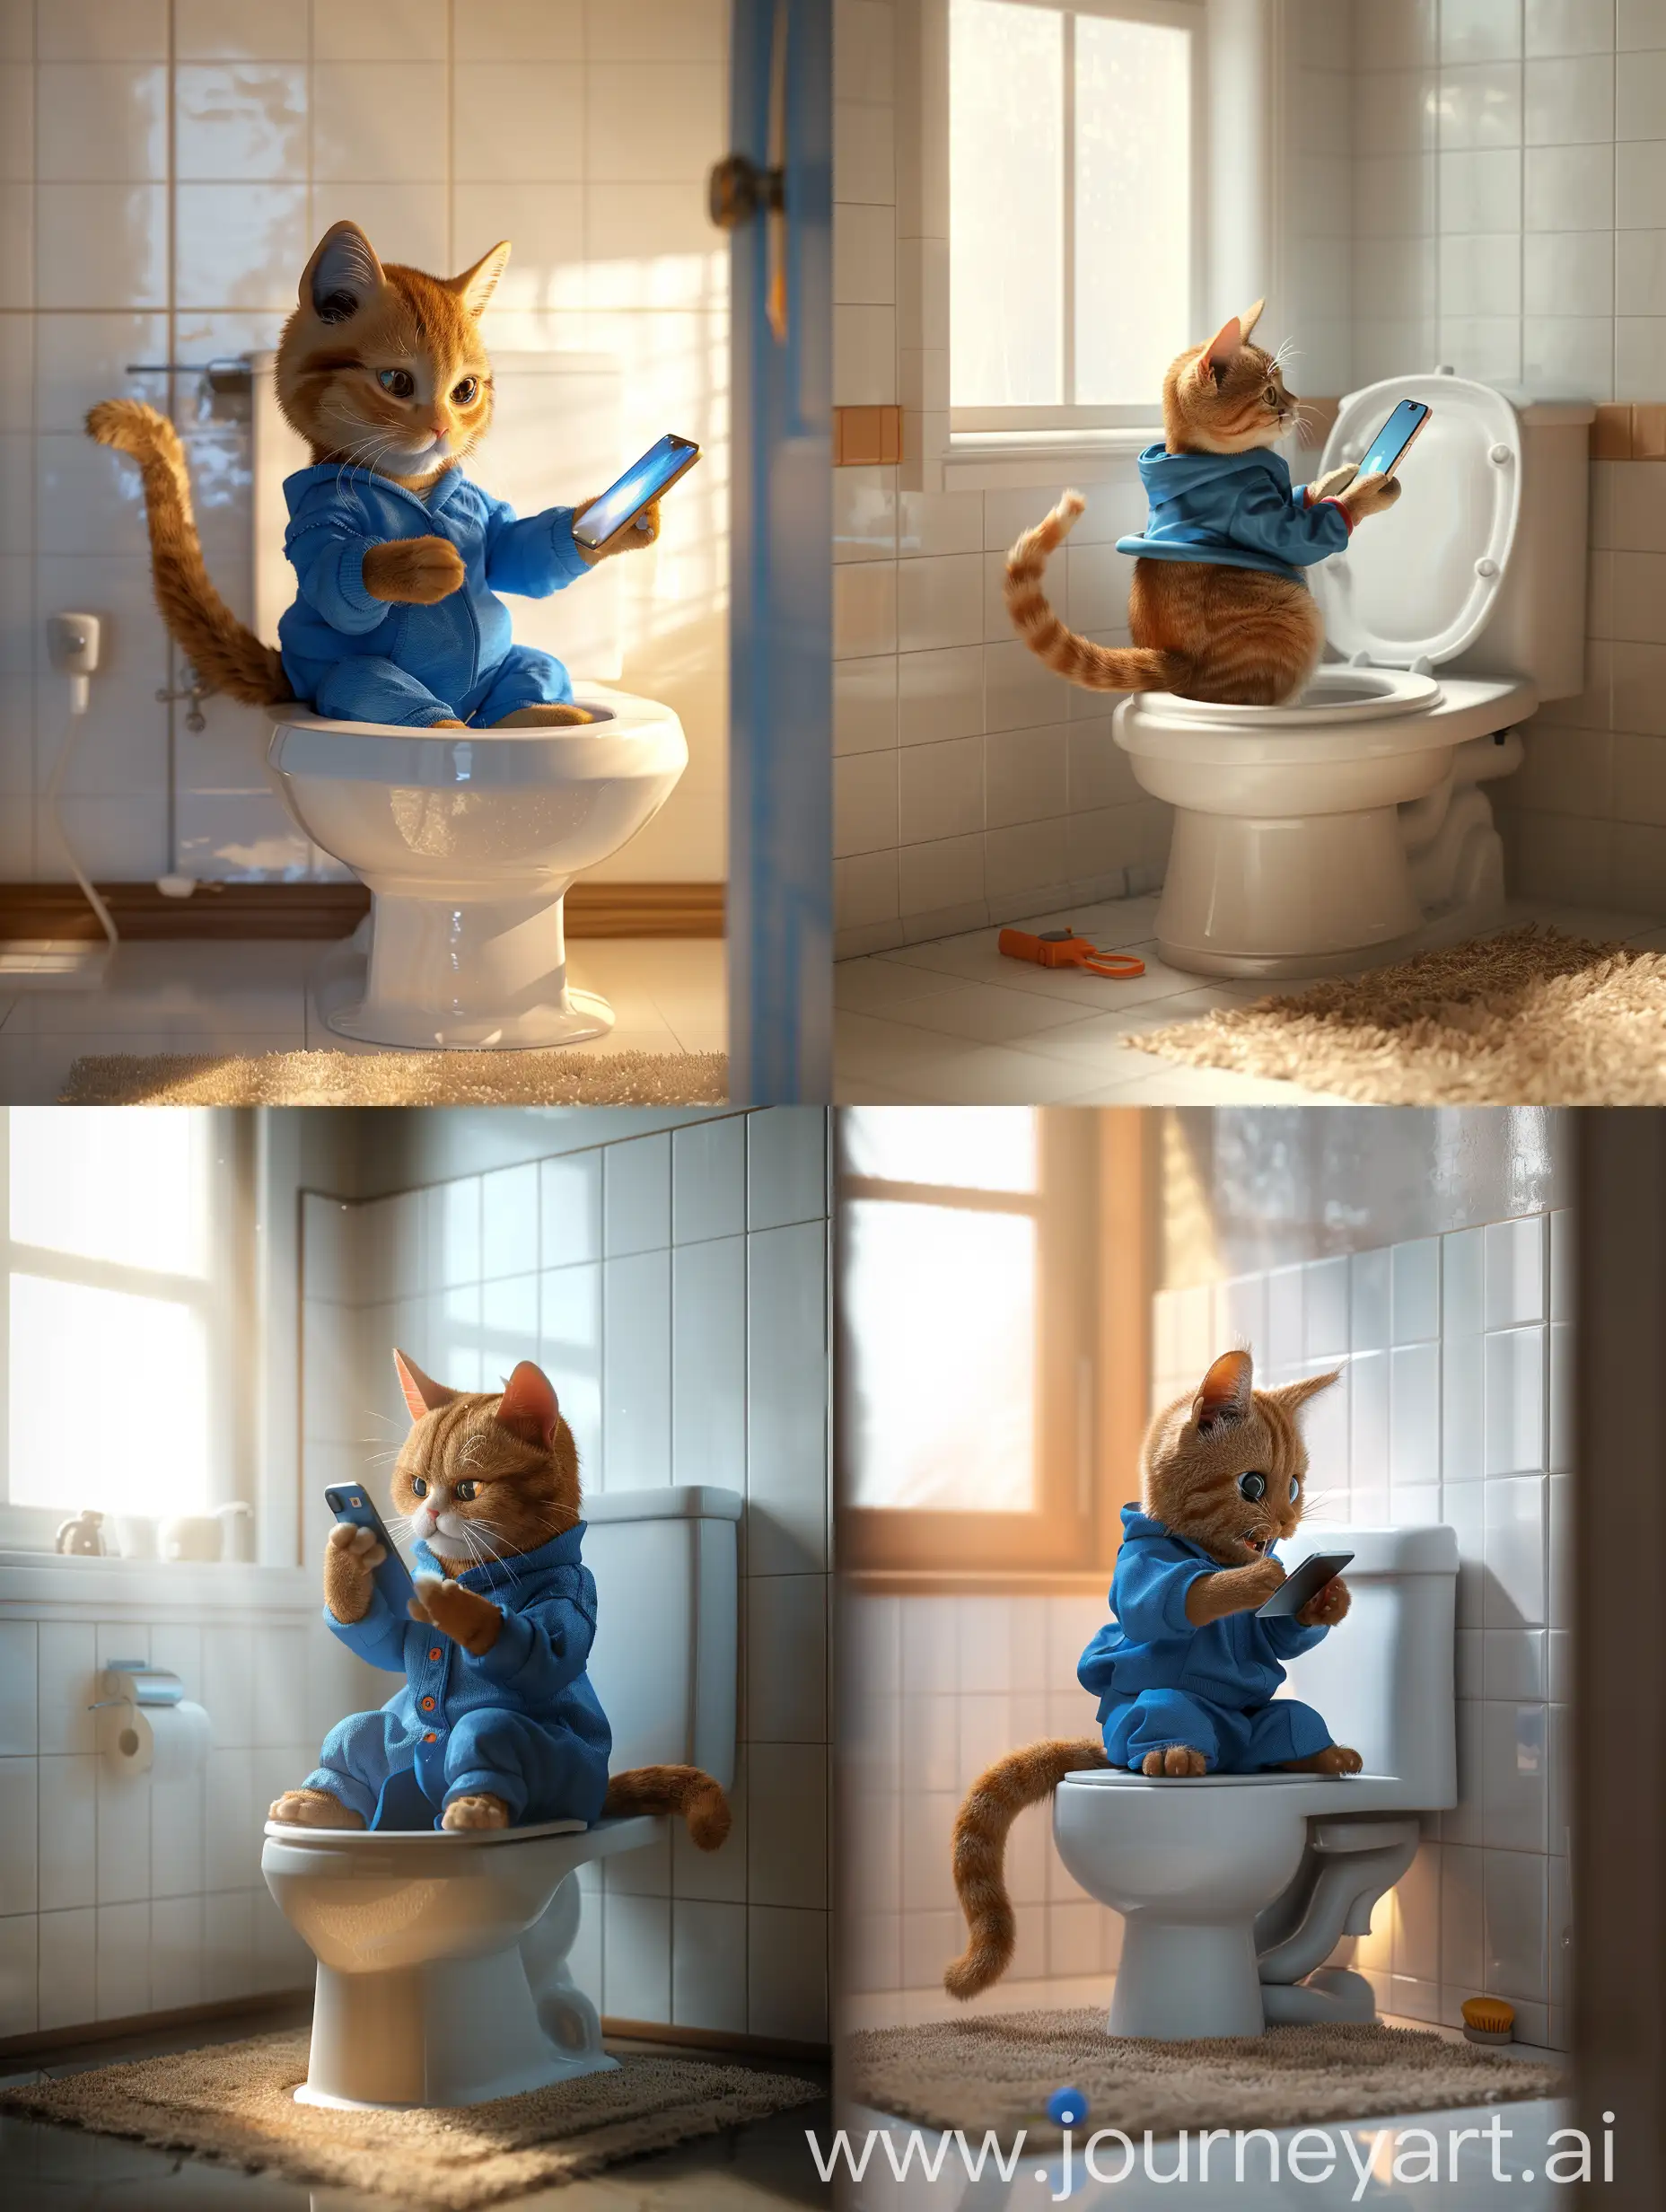 A small orange tabby cat sitting on an open toilet in a bathroom, happily and exaggeratedly playing with an Apple iPhone 15. The cat is wearing blue clothing, using the toilet. The bathroom has white tiled walls and a soft beige rug. Warm morning light filters through a frosted window, casting a gentle glow over the scene. The image is in the style of realistic style, with a 3D rendering effect, with bright colors, at a high resolution, as a full body portrait. Created using: Canon EOS R5 camera, detailed textures, vibrant lighting, natural shadows, high-definition, professional 3D rendering, realistic, humorous, everyday life